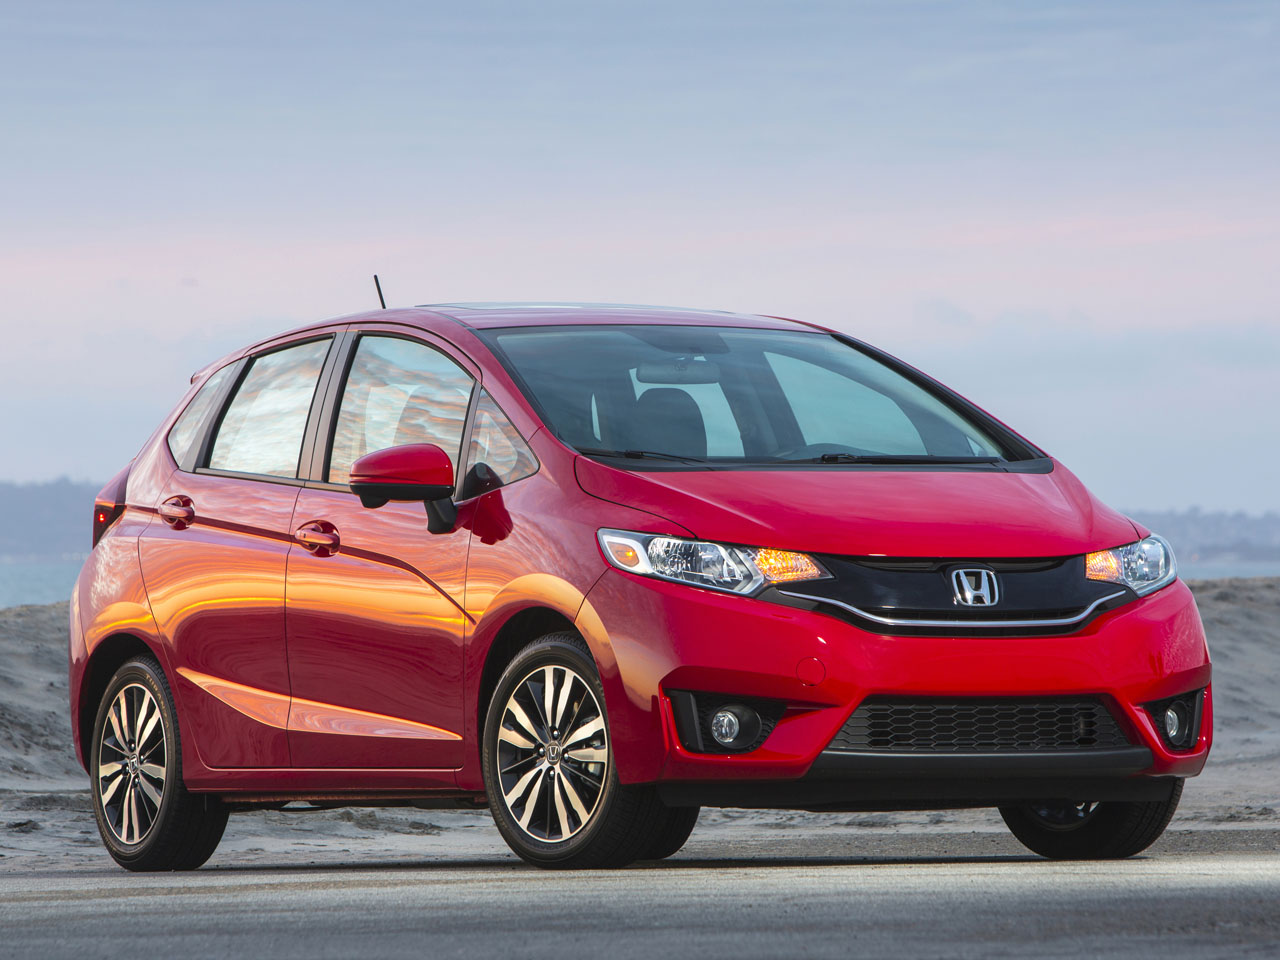 Honda fit canadian prices #2